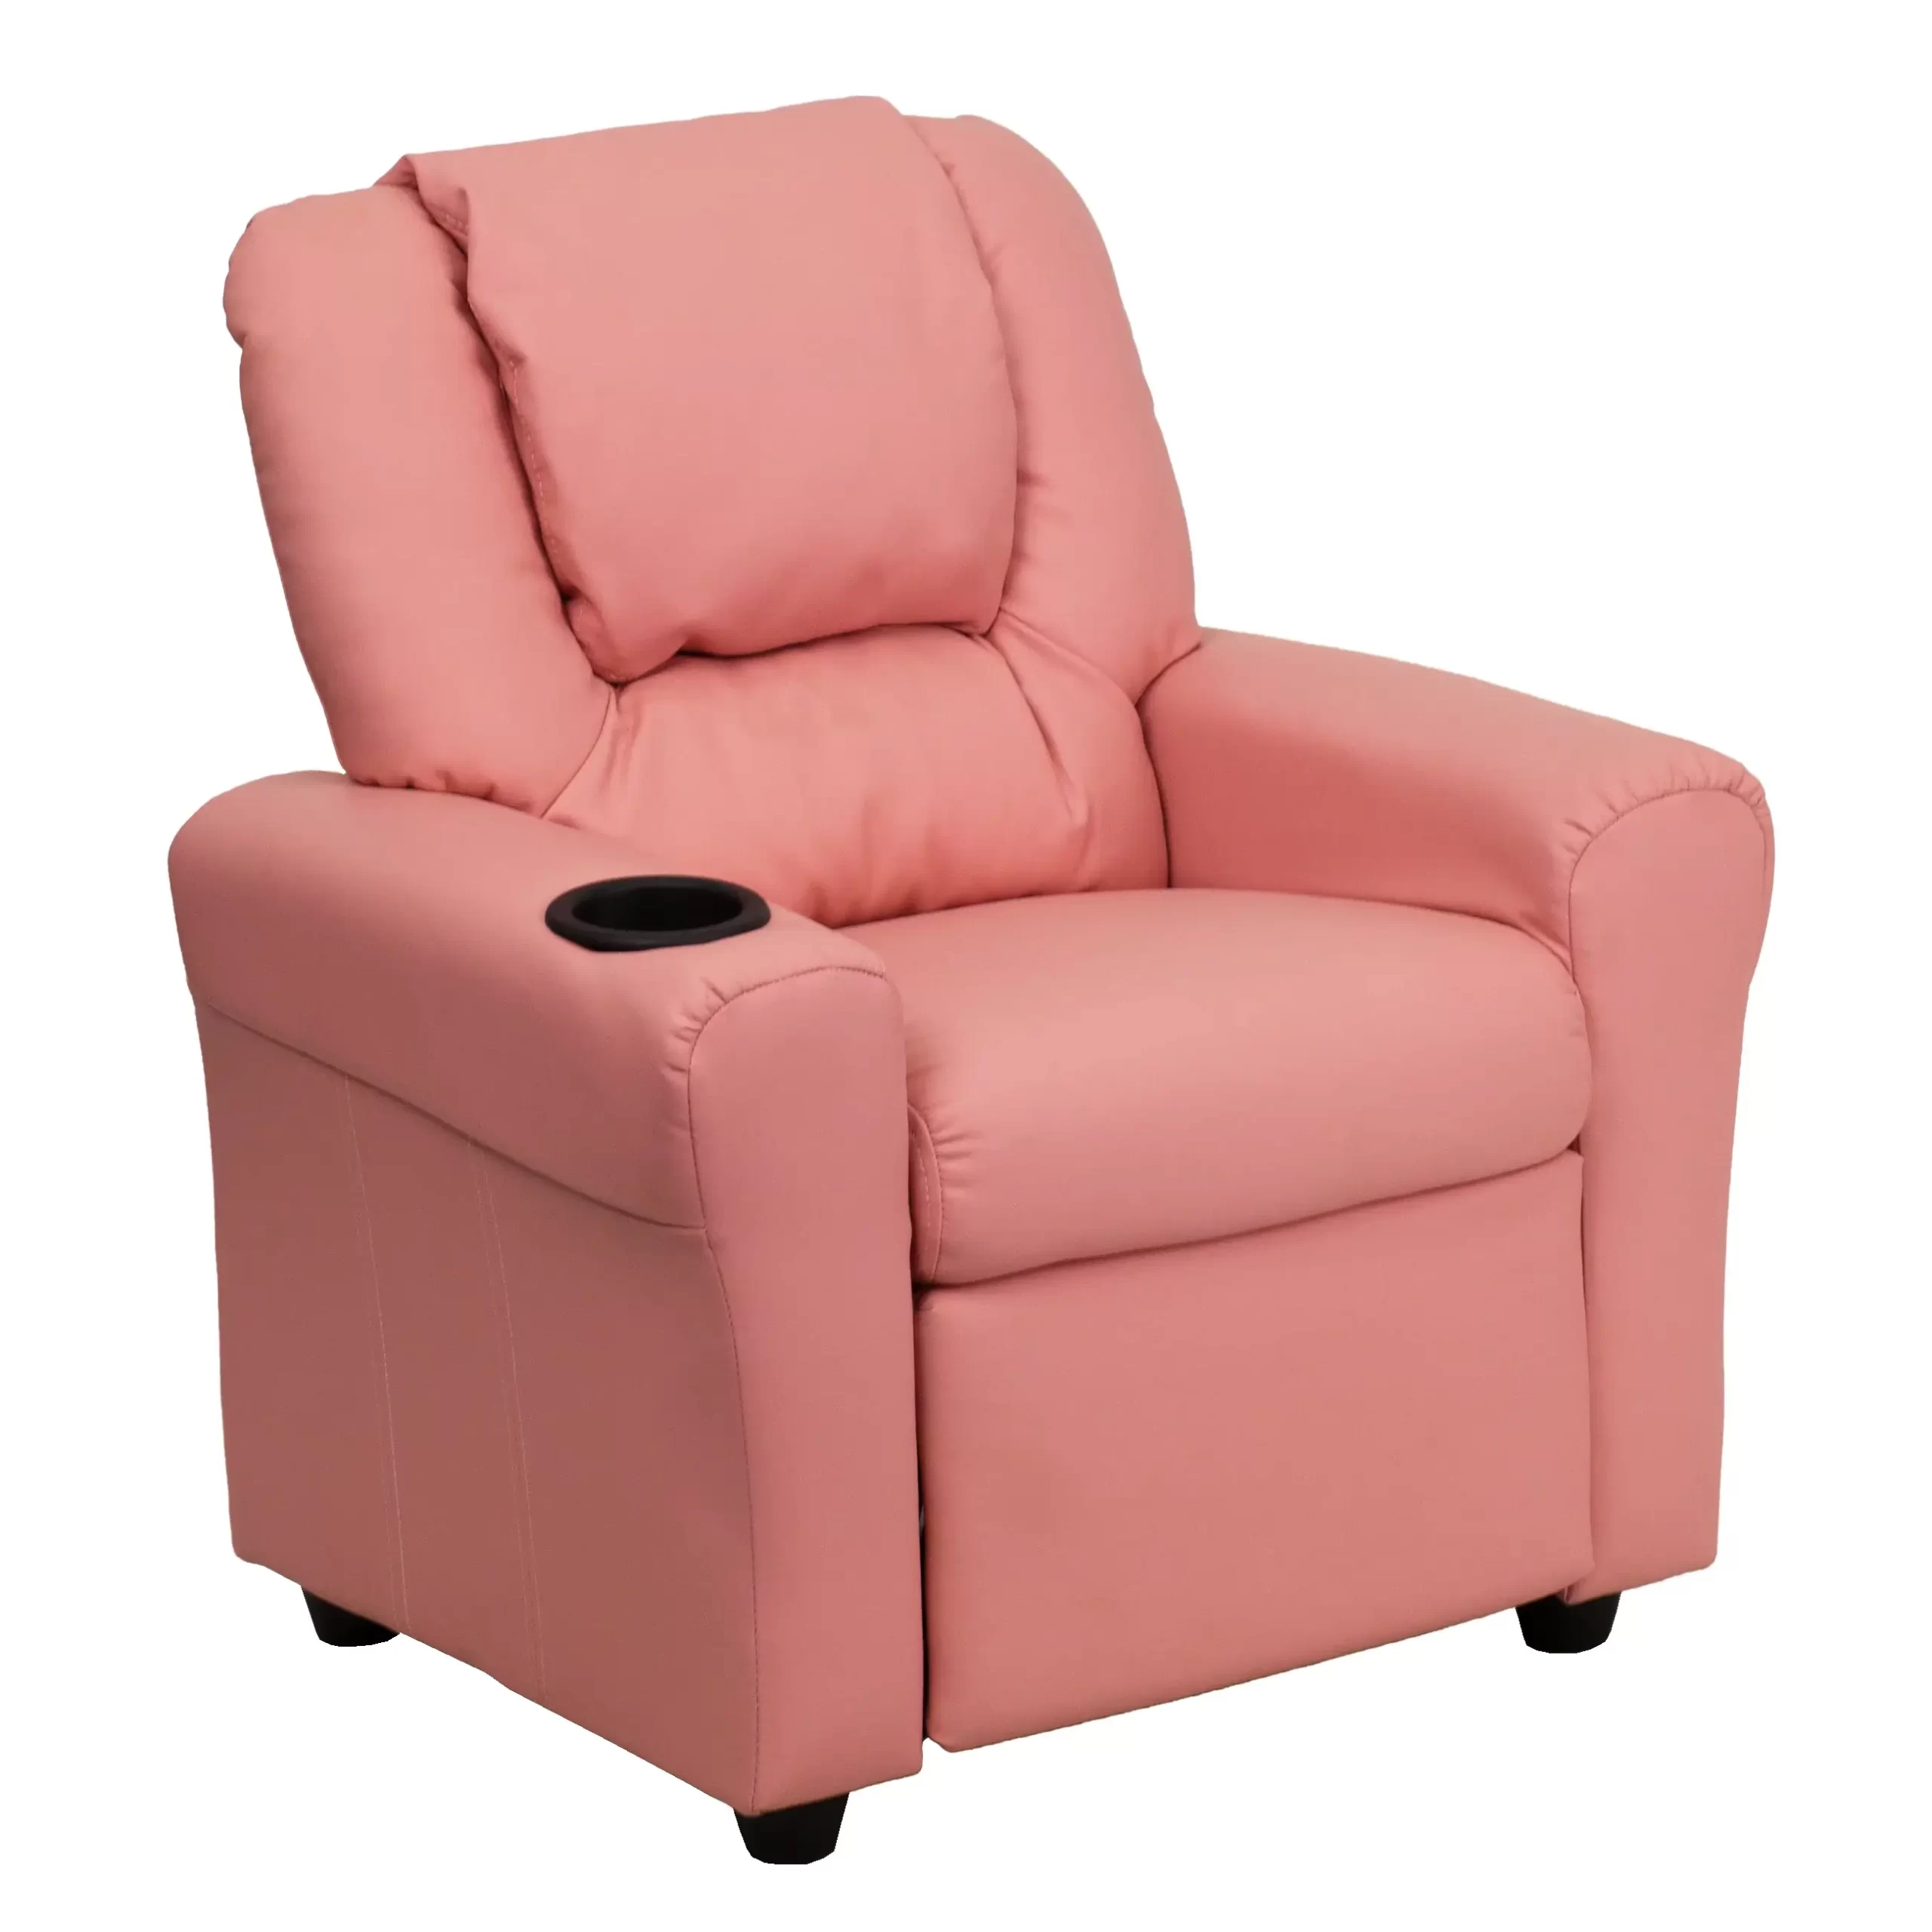 Flash Furniture Contemporary Cheap Recliner Review for Kids